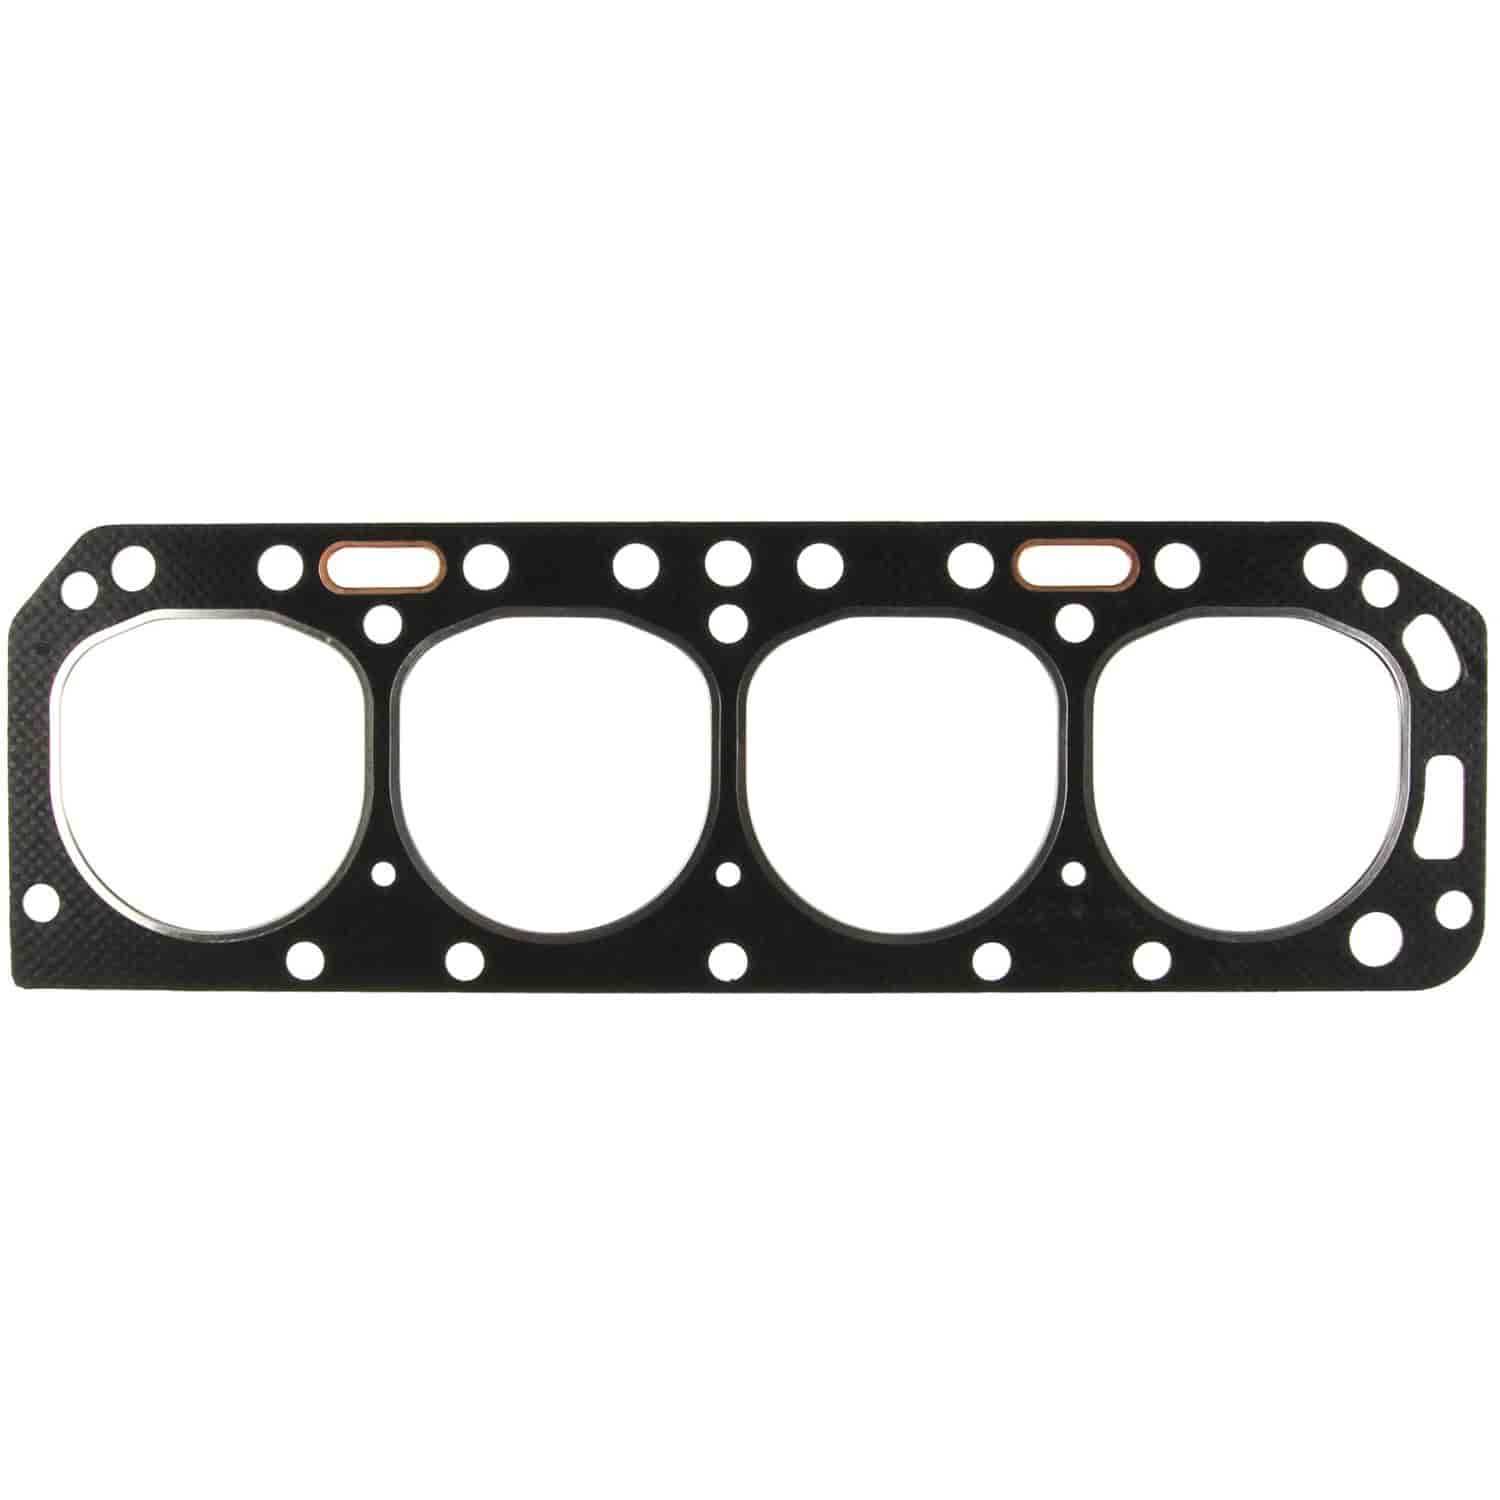 Cylinder Head Gasket for 1958-1981 Ford Industrial & Tractor 134, 172, 192 ci. Engines